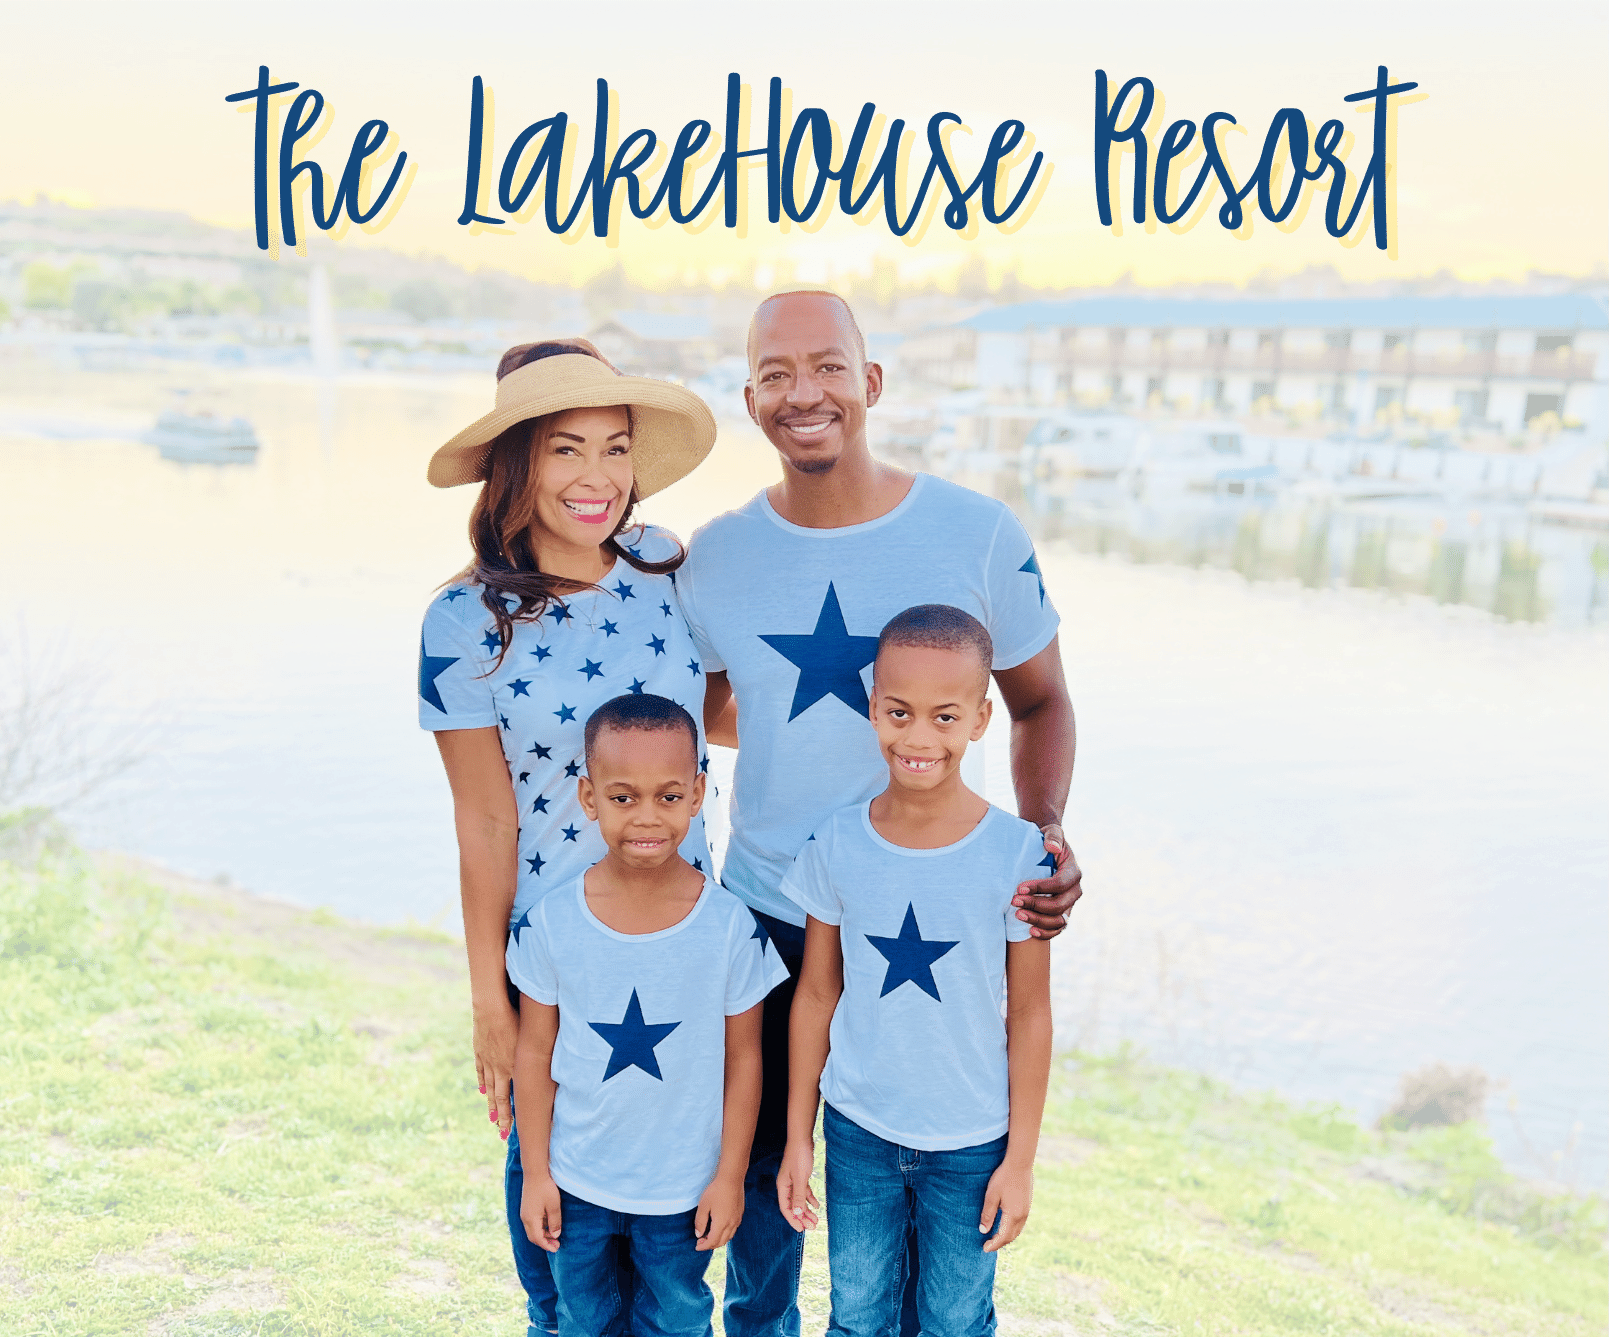 5 things families will love about the LakeHouse Resort.